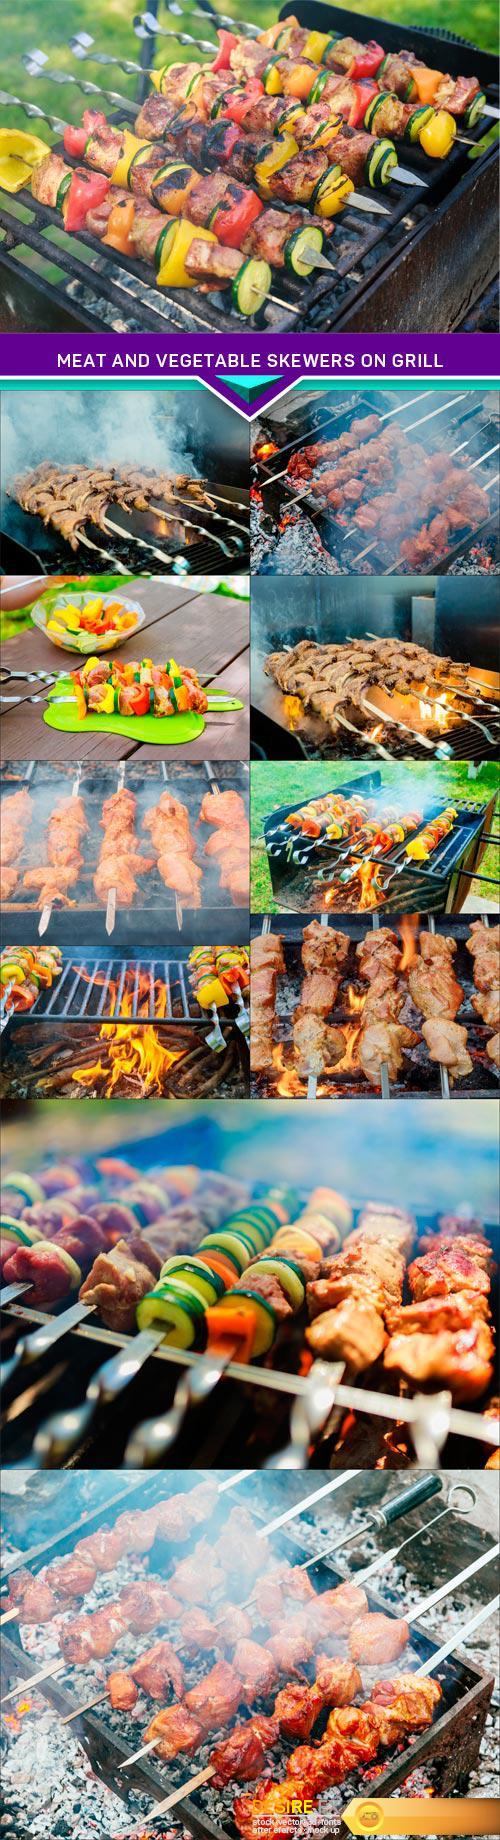 Meat and vegetable skewers on grill 11X JPEG